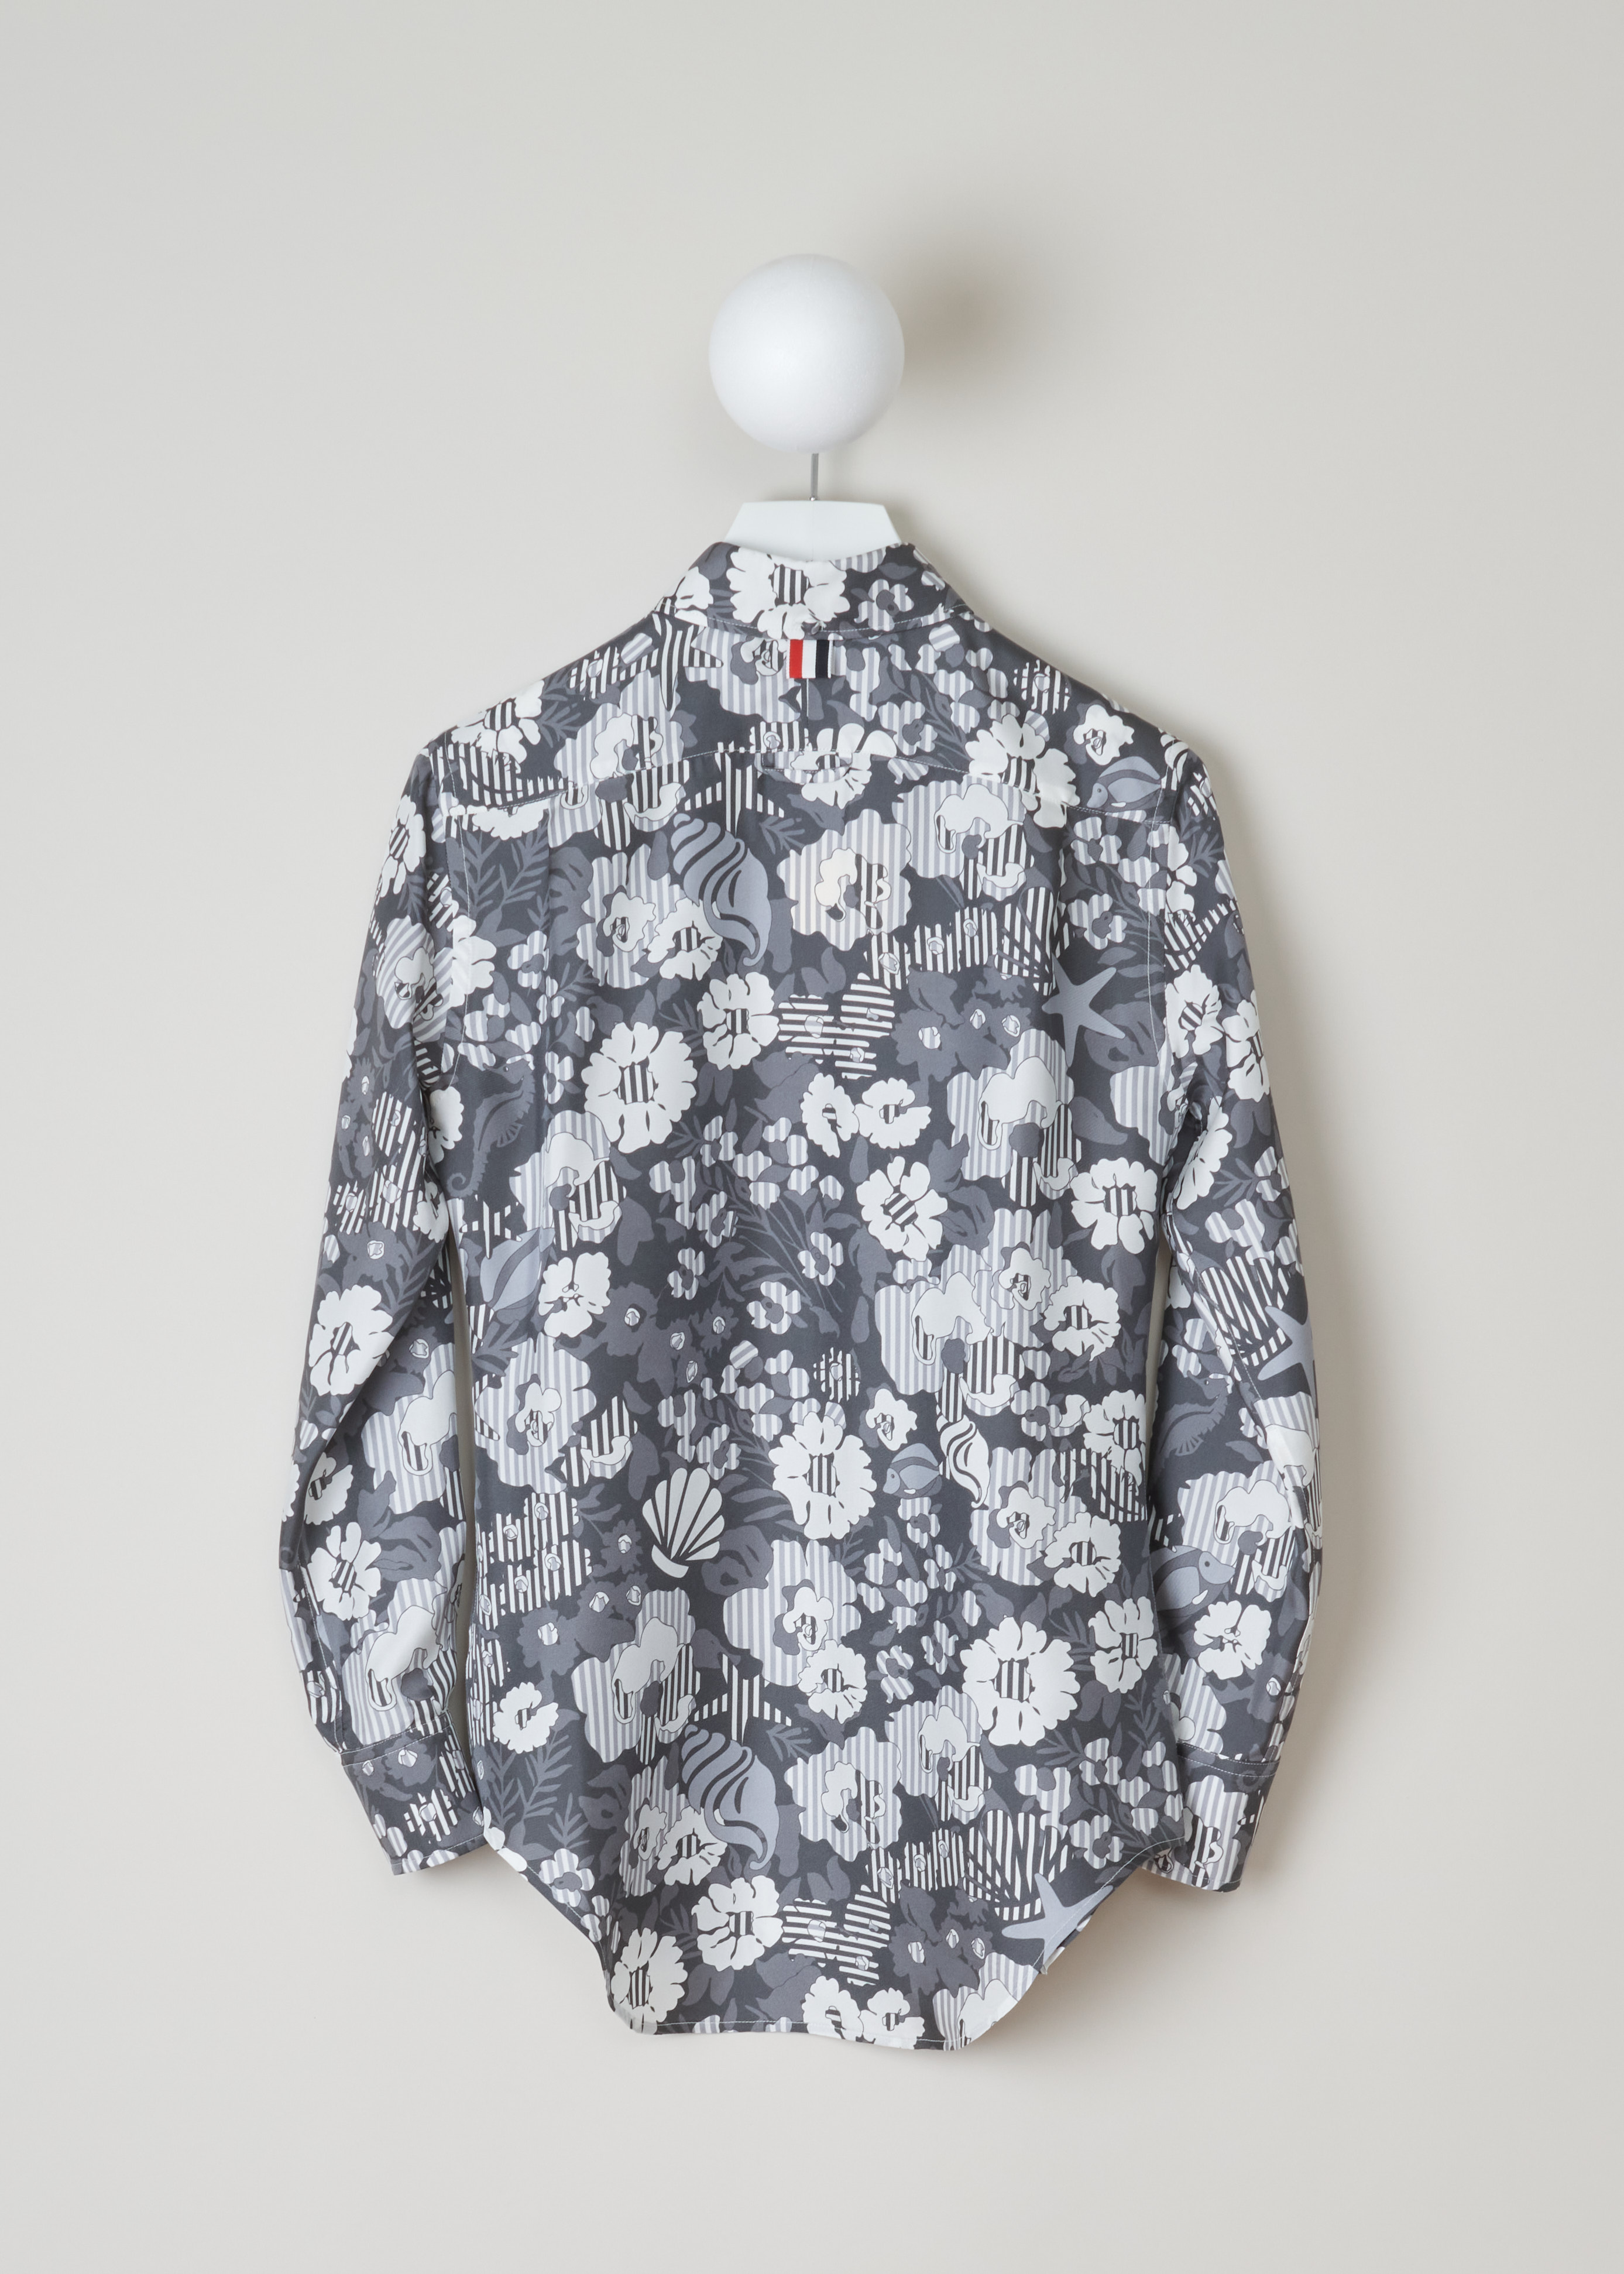 Thom Browne Sunny floral print shirt FLL005A_06160_035_Med_Grey back. Long sleeved shirt in the sunny floral pattern with a pointed, buttoned collar, a chest pocket, an exterior name tag, buttoned cuffs and a rounded hem.